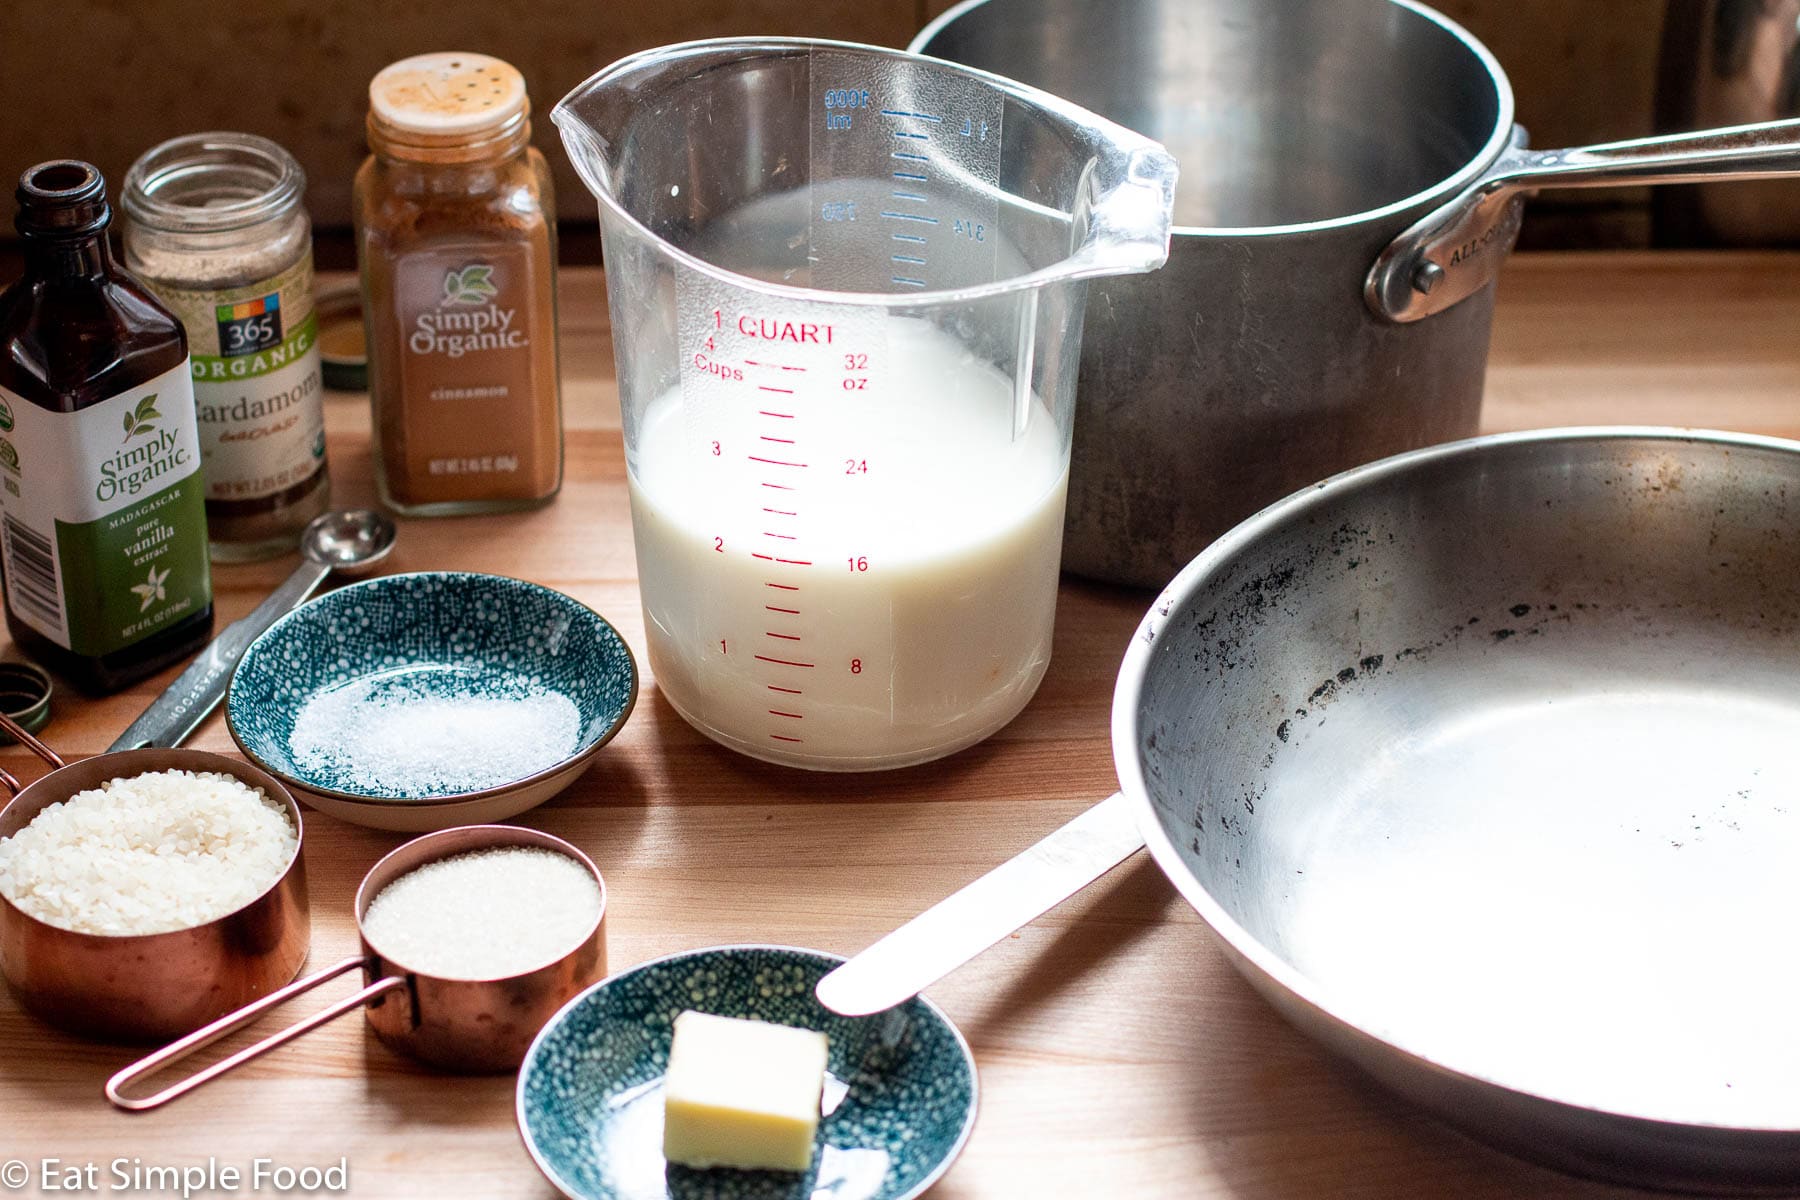 Raw ingredients in small containers, measuring cups, and 1 pot and 1 pan. In containers are sugar, milk, butter with knife and salt.